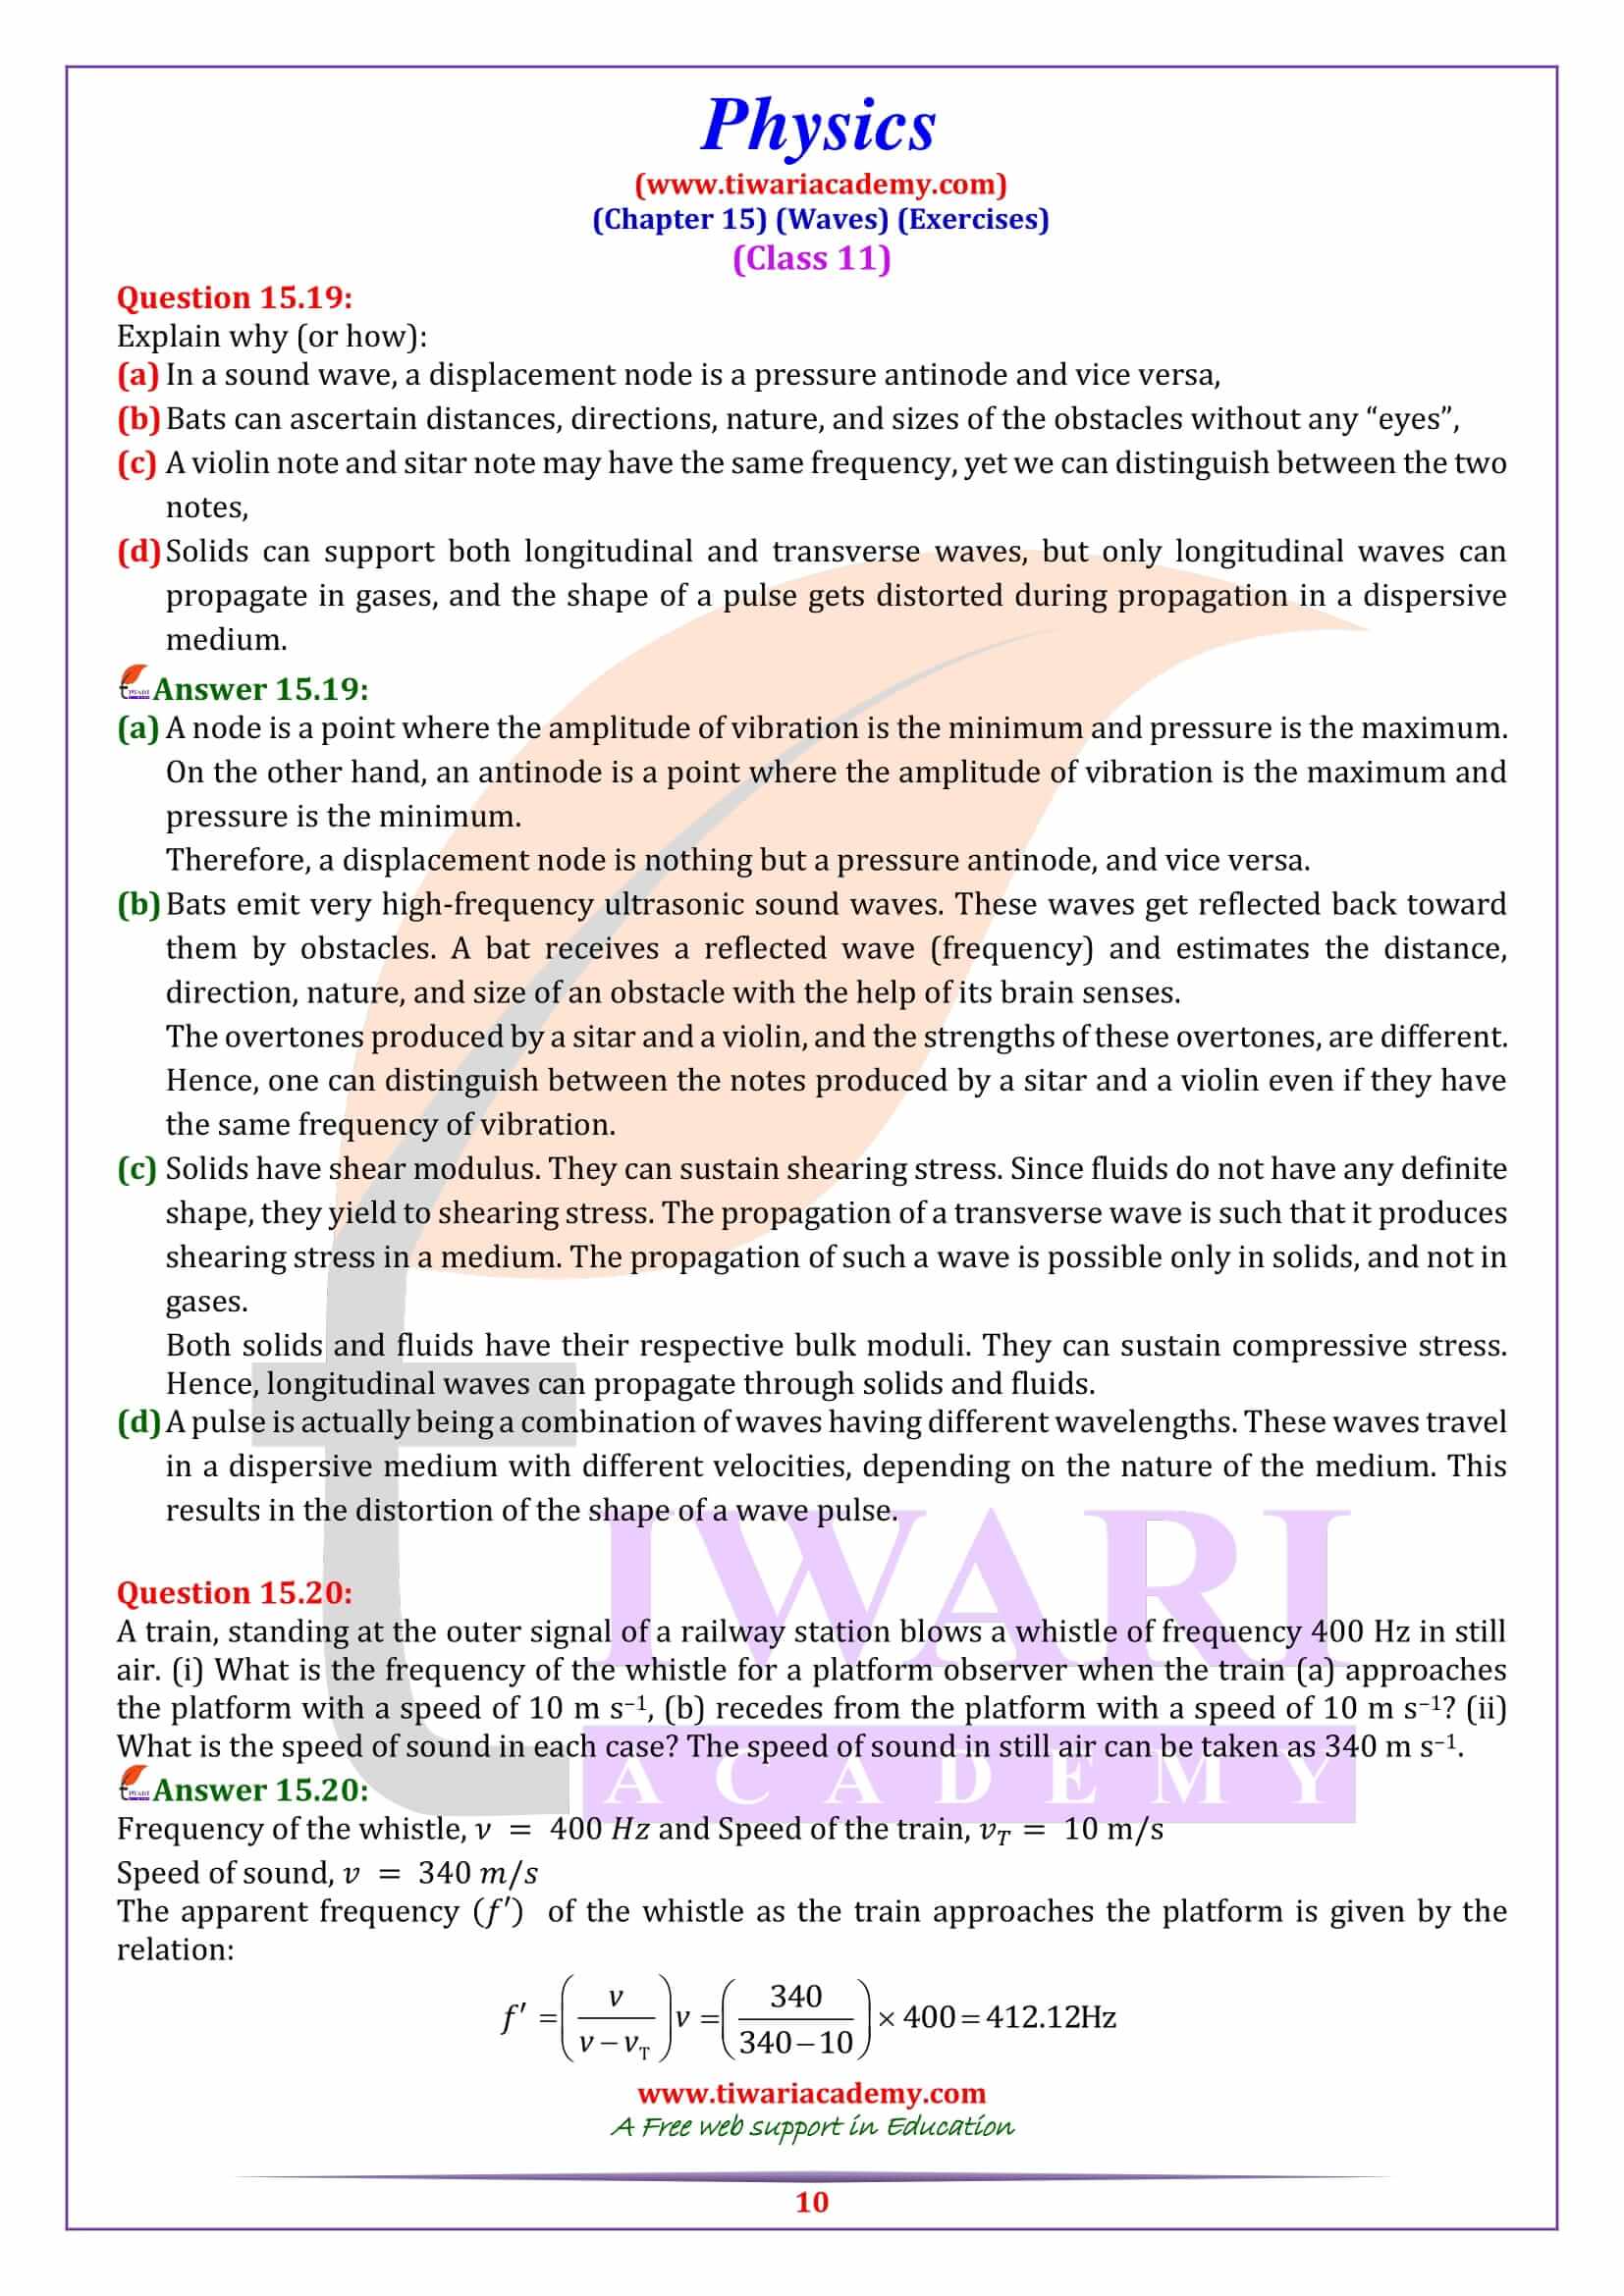 Class 11 Physics Chapter 15 Exercises Answers in PDF